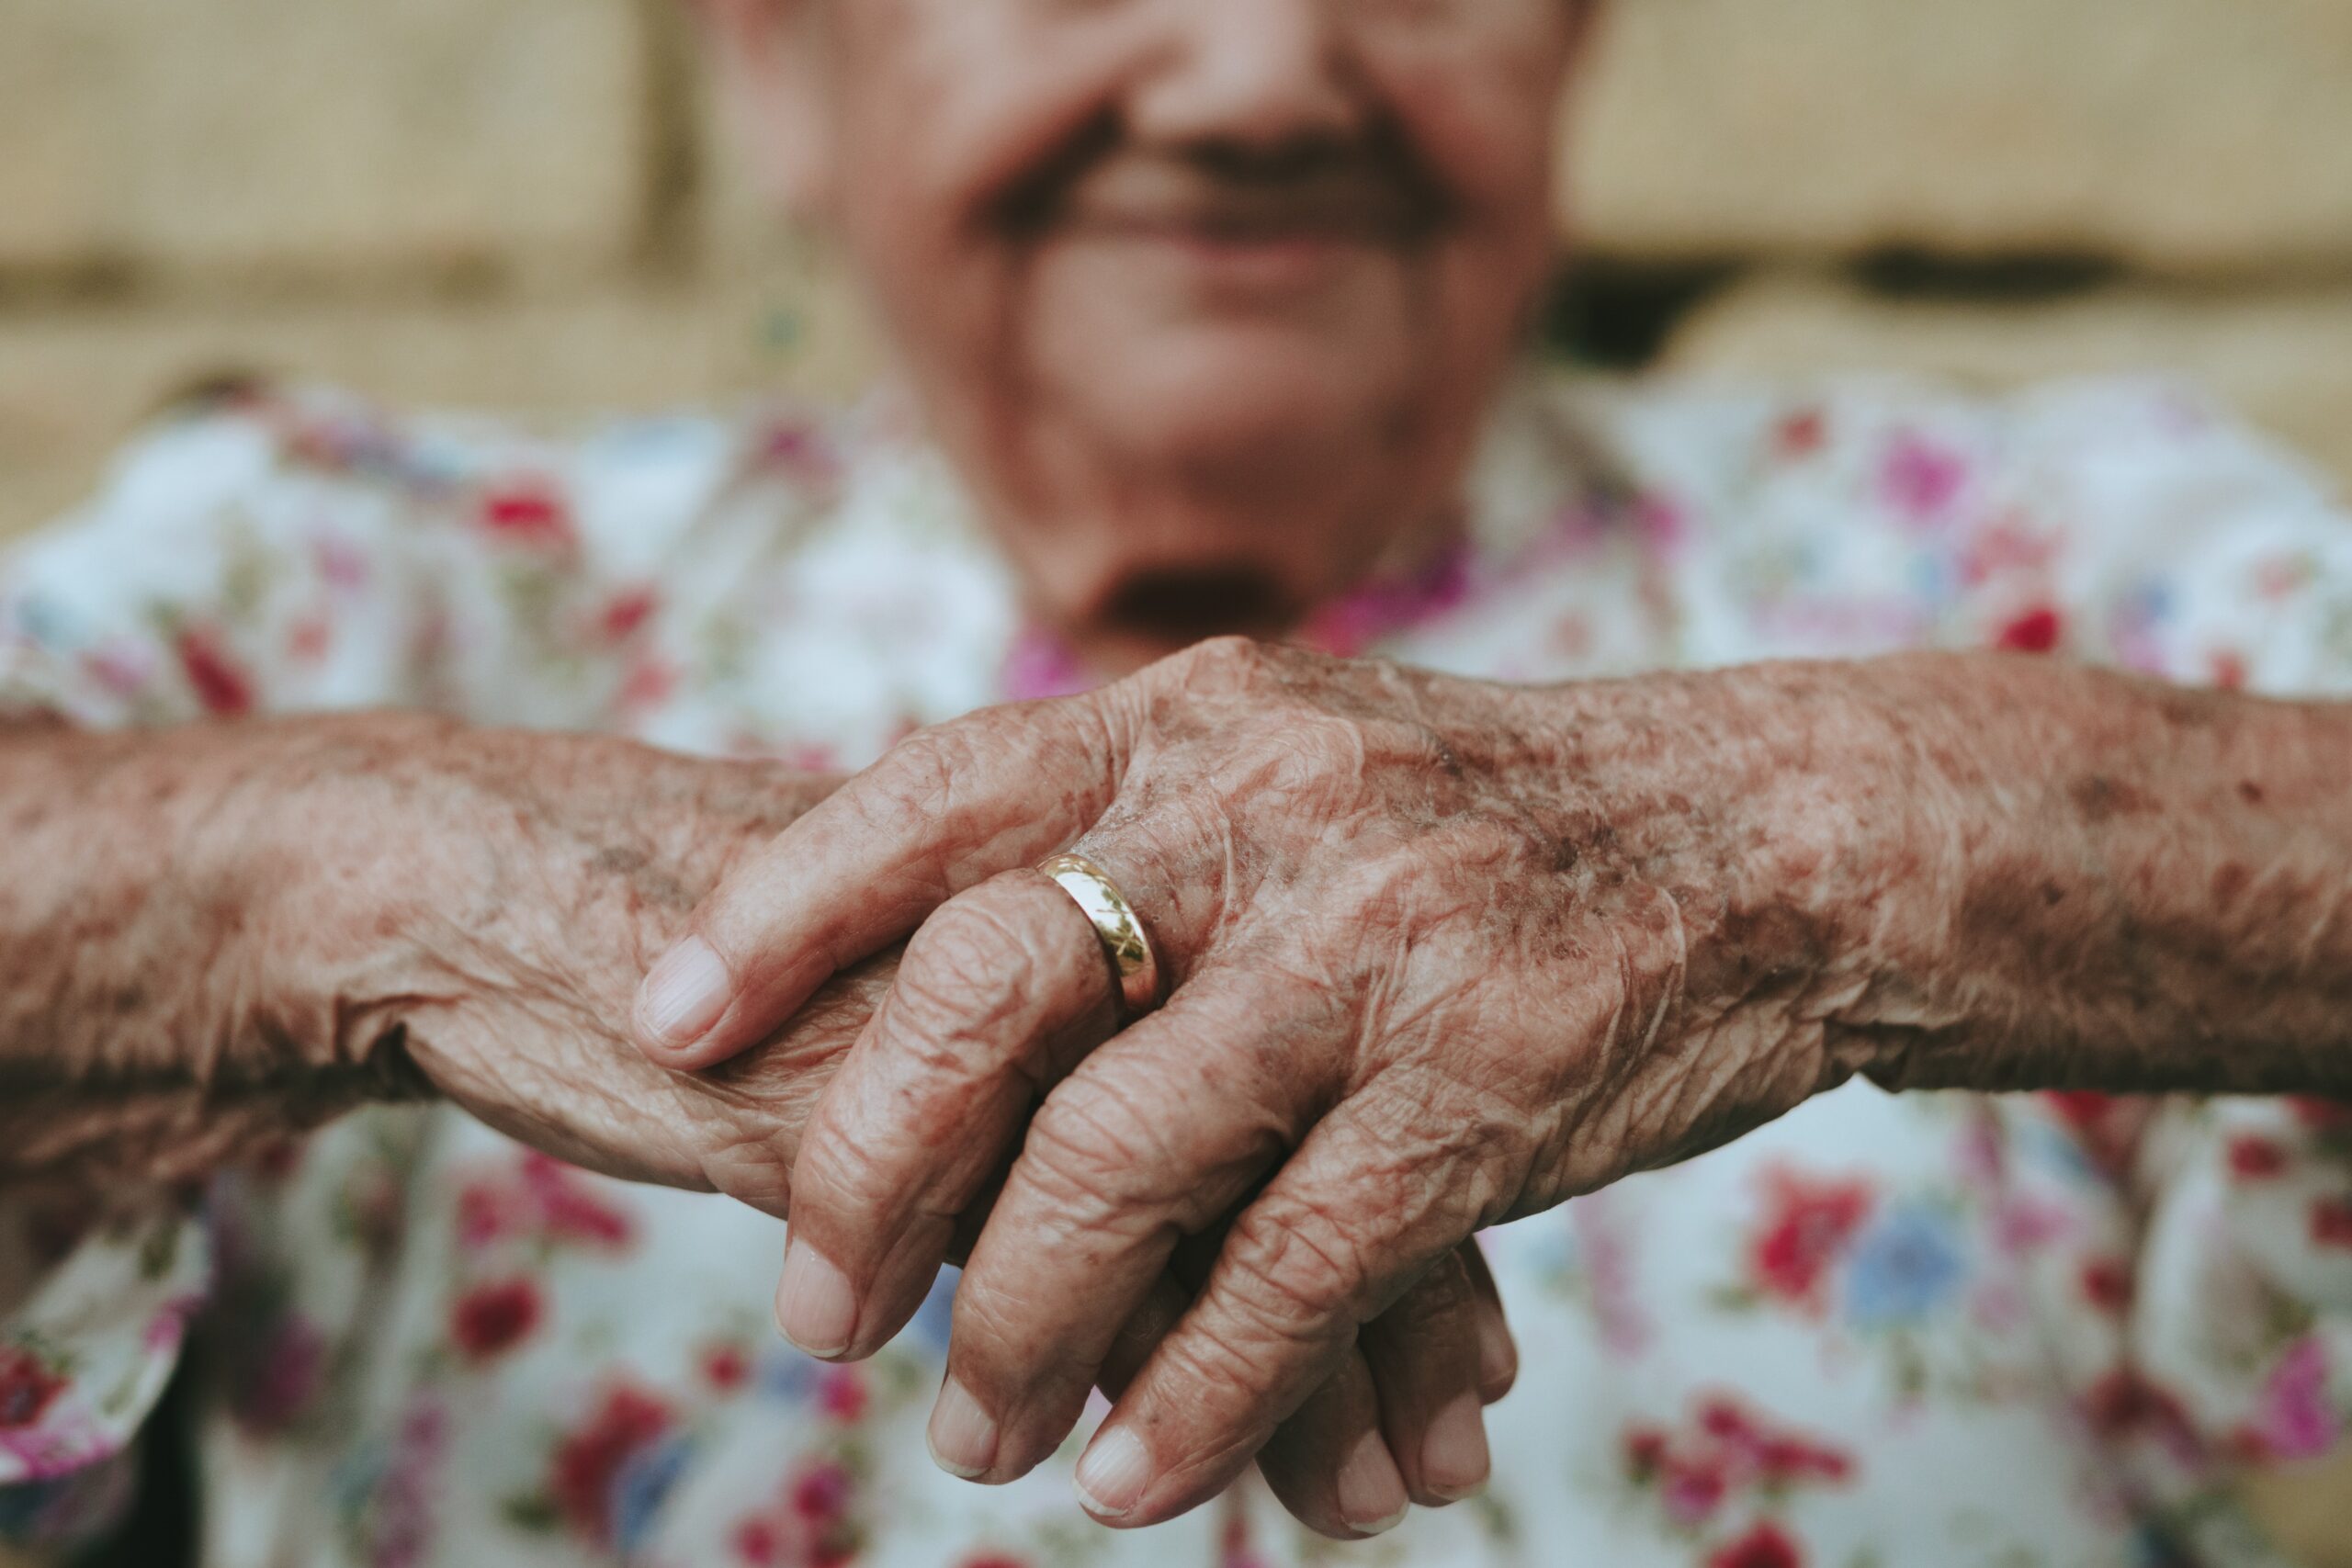 Elderly person's hands and arms for article on scams targeting seniors.